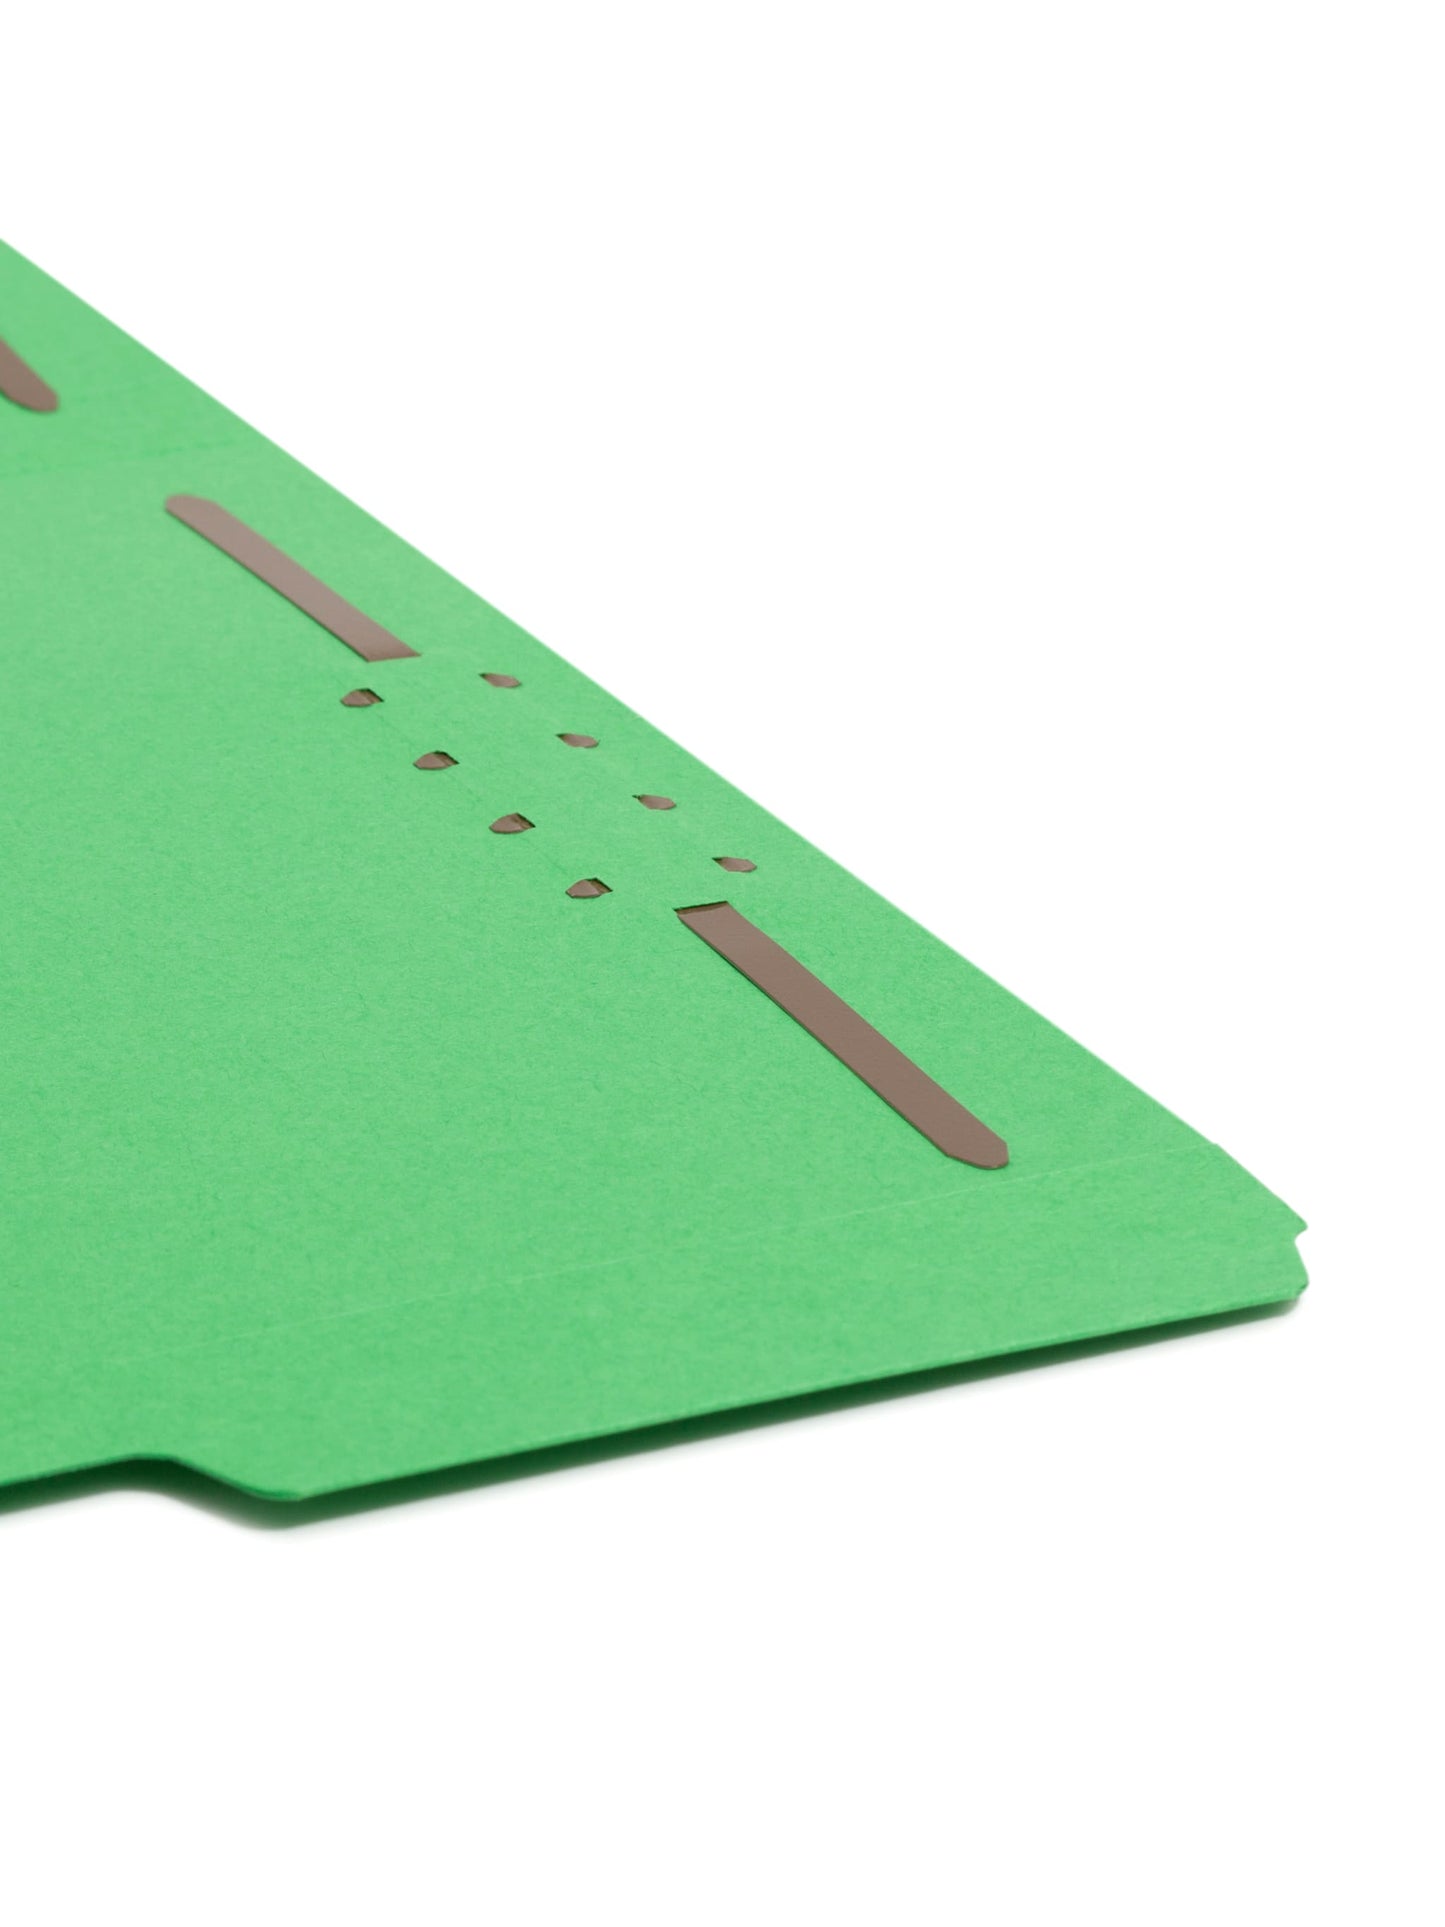 WaterShed®/CutLess® Reinforced Tab Fastener File Folders, Green Color, Letter Size, 086486121422